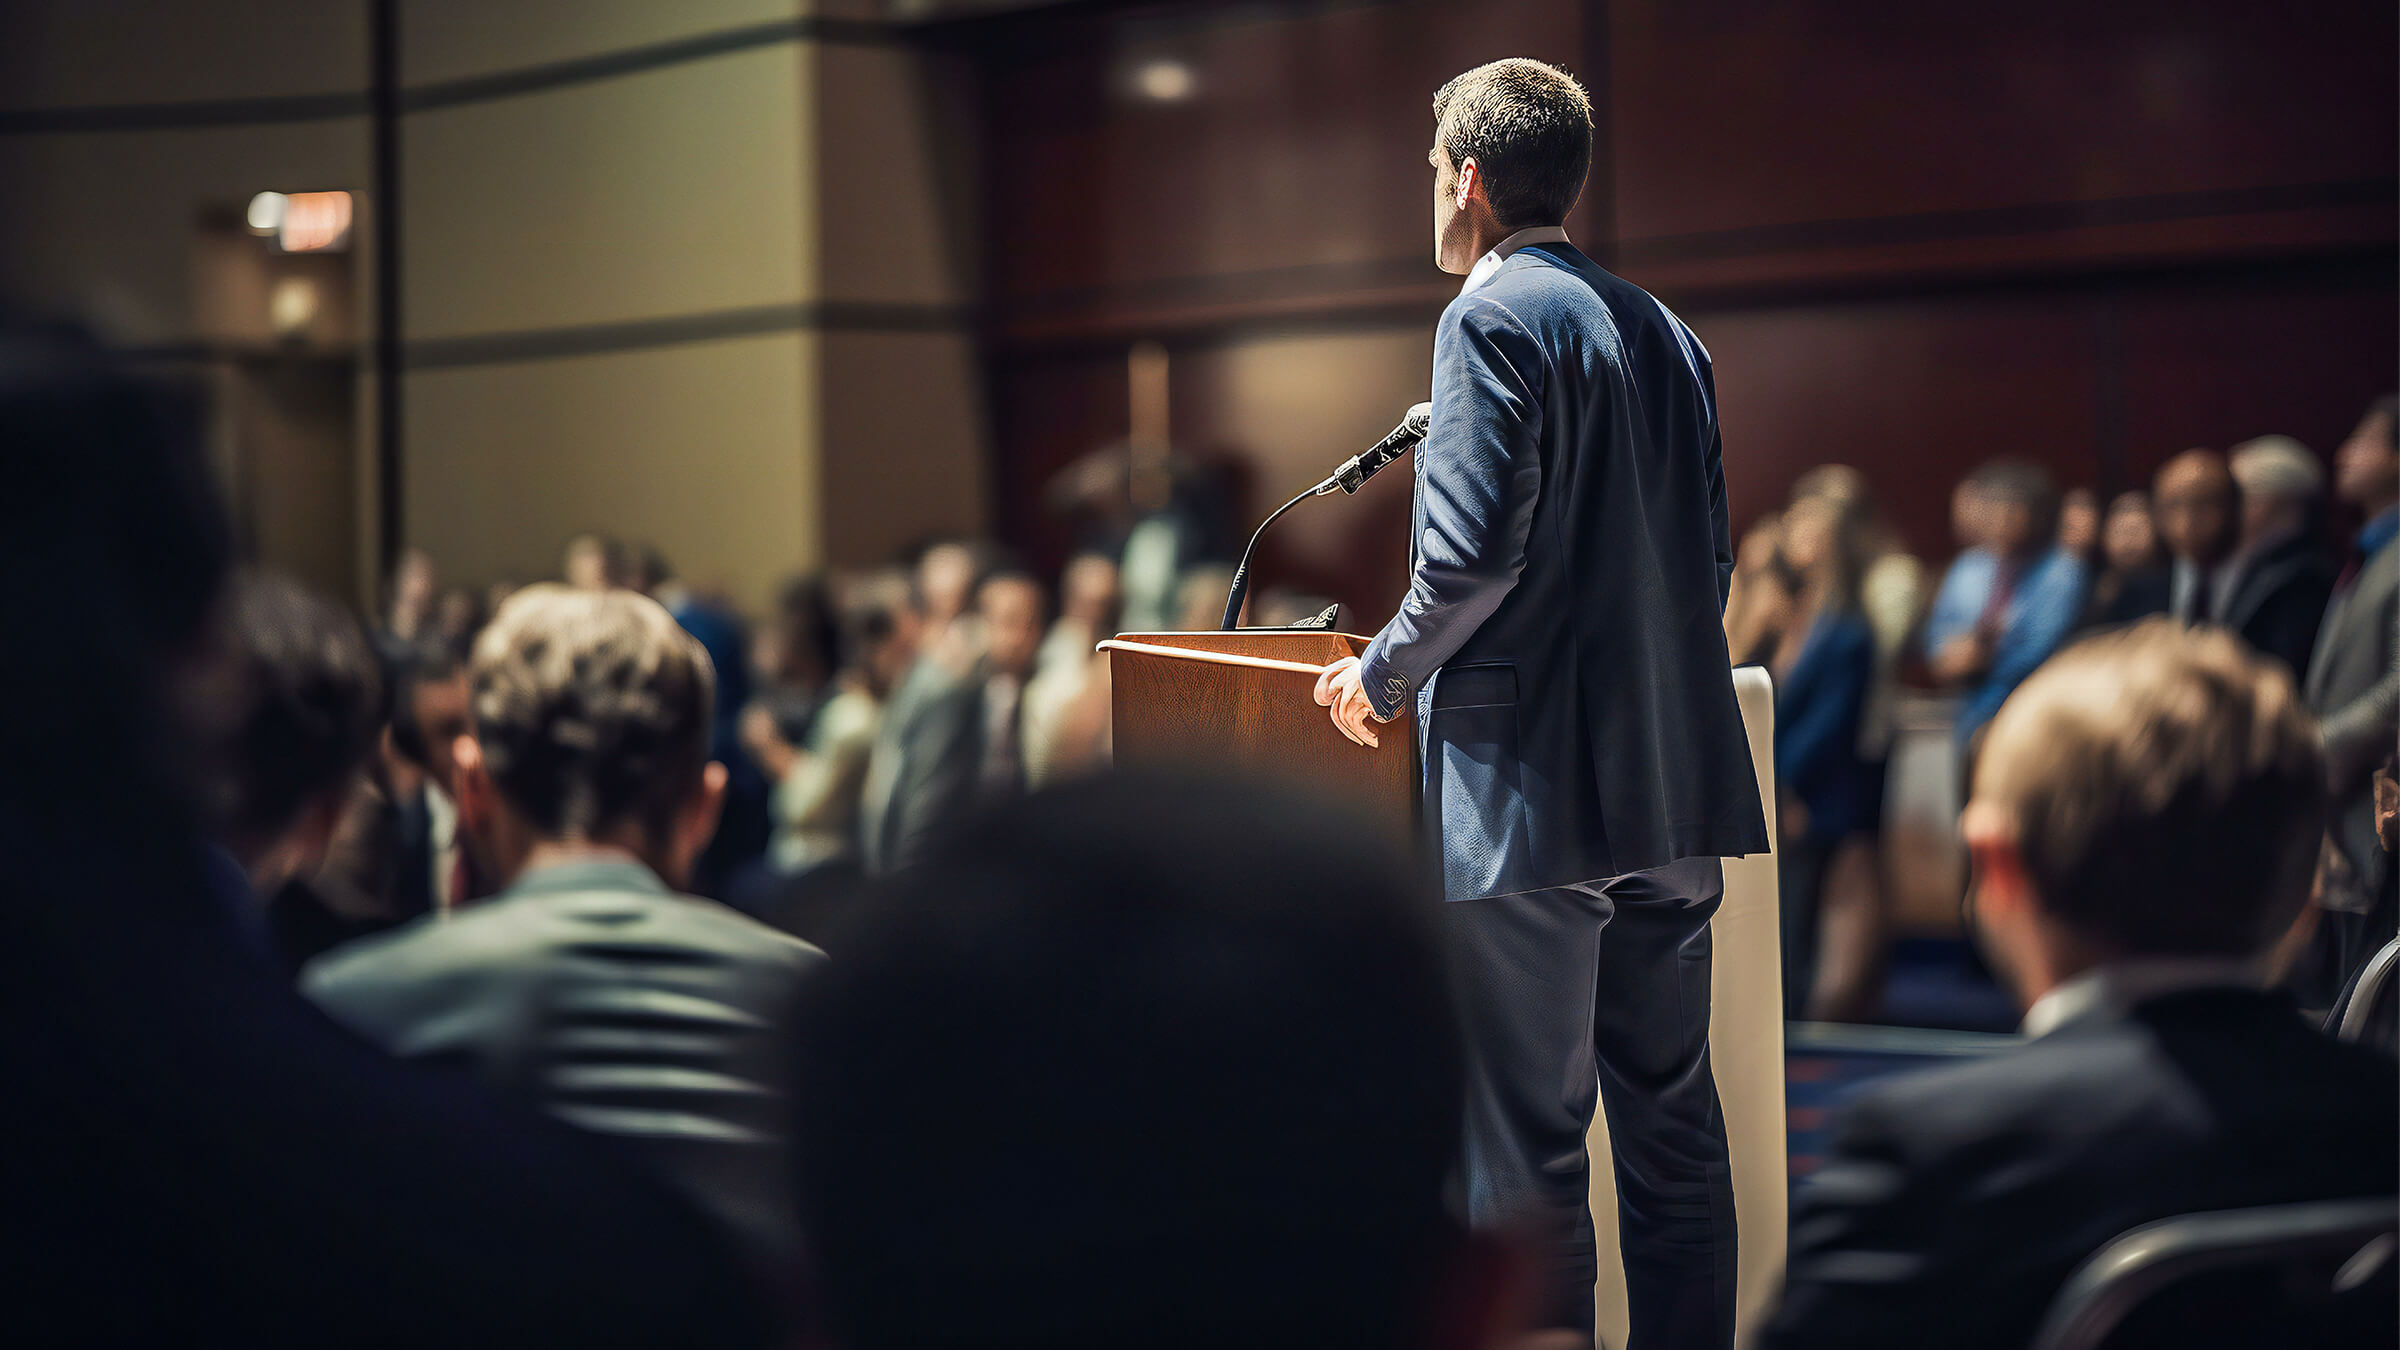 Businessman giving presentations at conference room